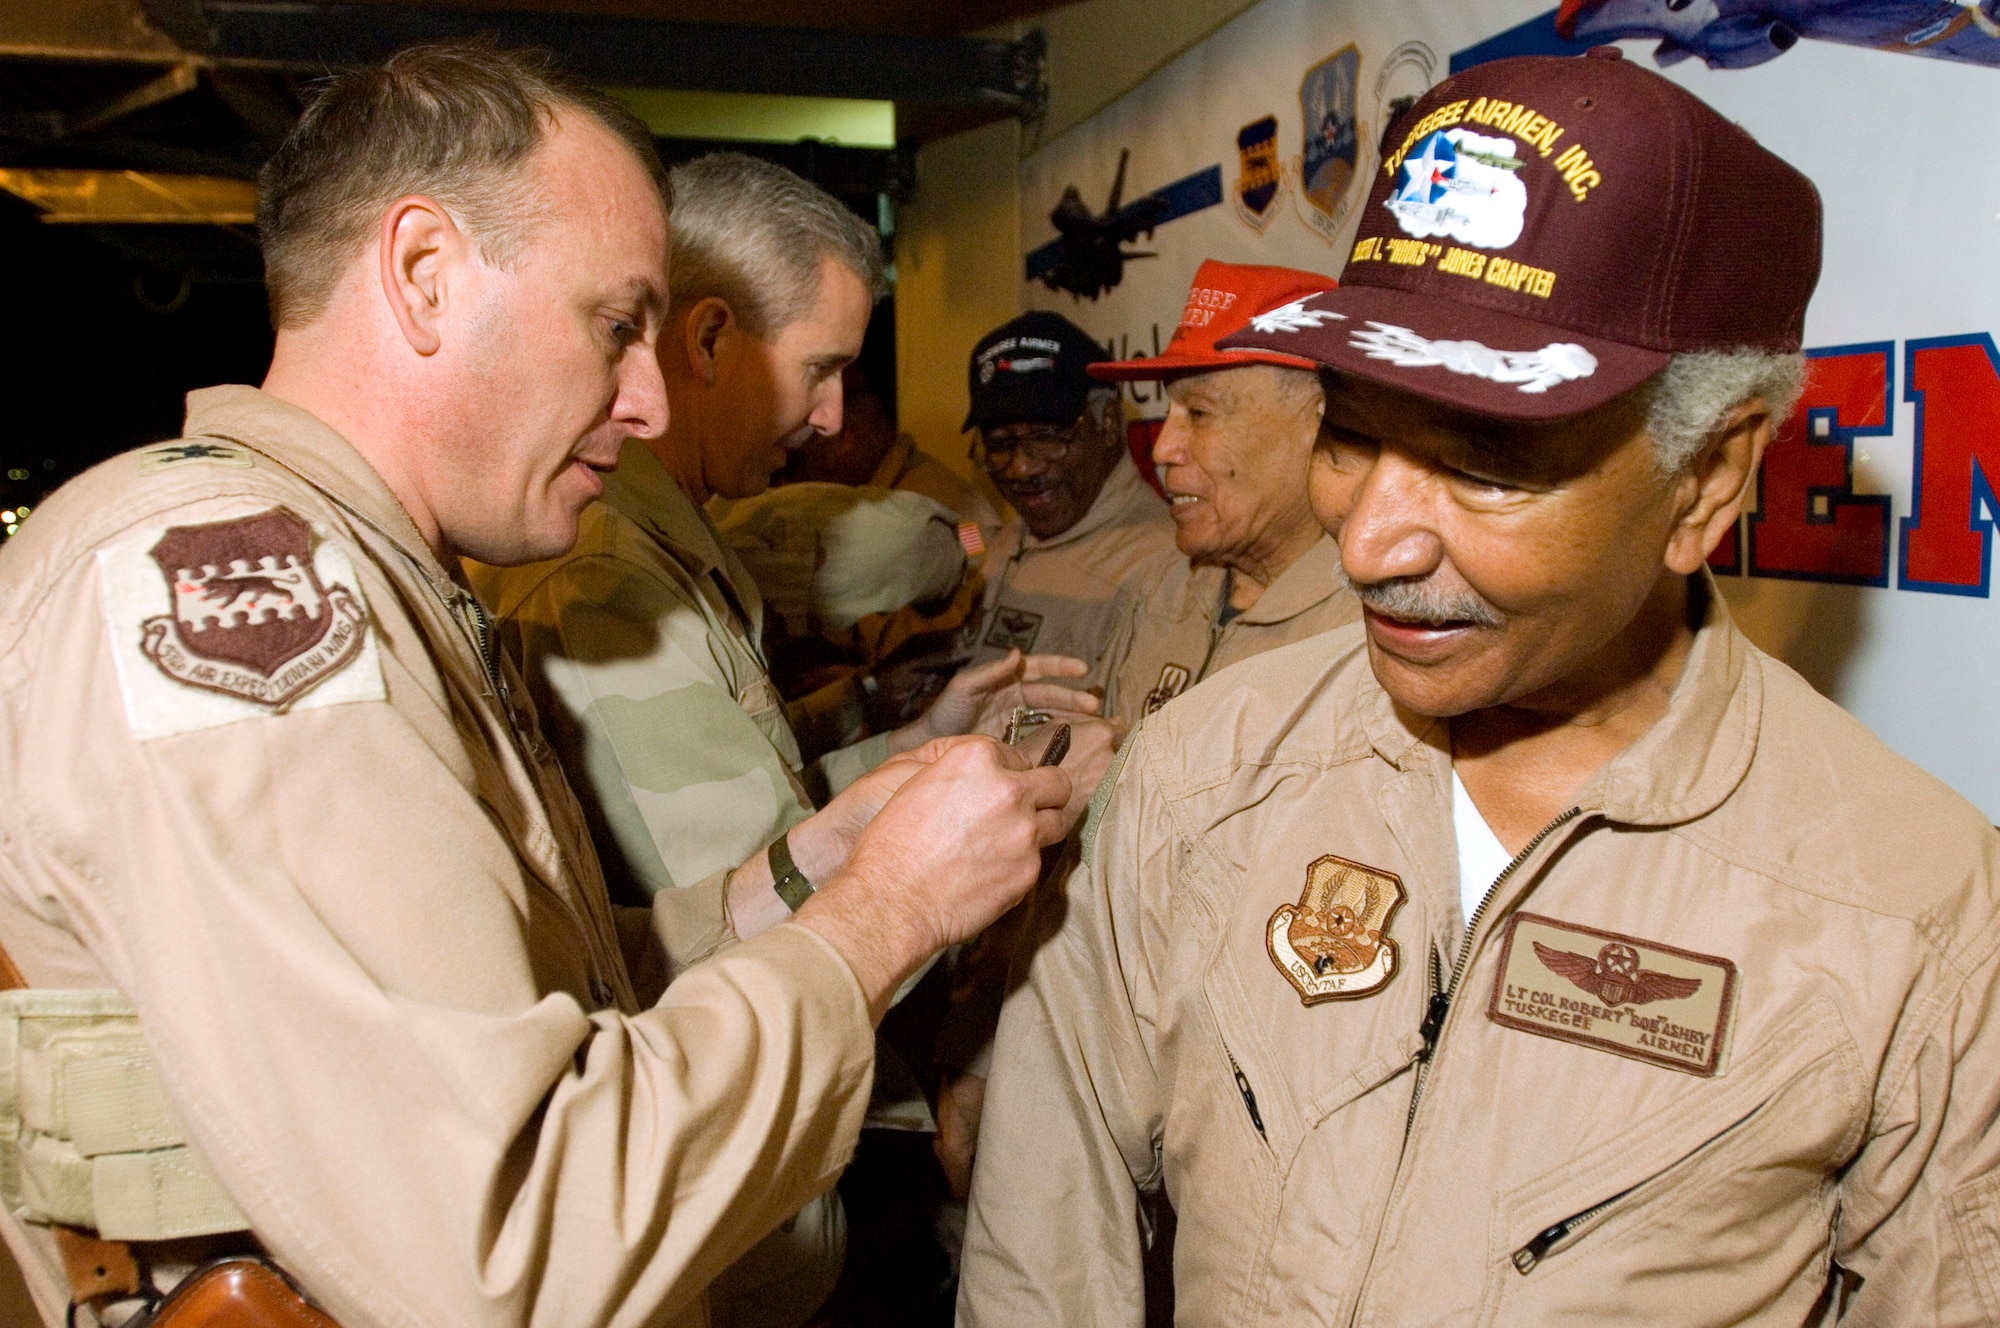 BALAD AIR BASE, Iraq (AFPN) -- Col. Gordon Jacobs (left) puts wing patches onto the uniform of retired Tuskegee Airman Lt. Col Robert Ashby. Colonel Ashby is one of five Tuskegee Airman visiting here. Colonel Jacobs is the 332nd Expeditionary Operations Group commander. The Army created the Tuskegee Airmen unit in 1941. (U.S. Air Force photo by Master Sgt. John E. Lasky)